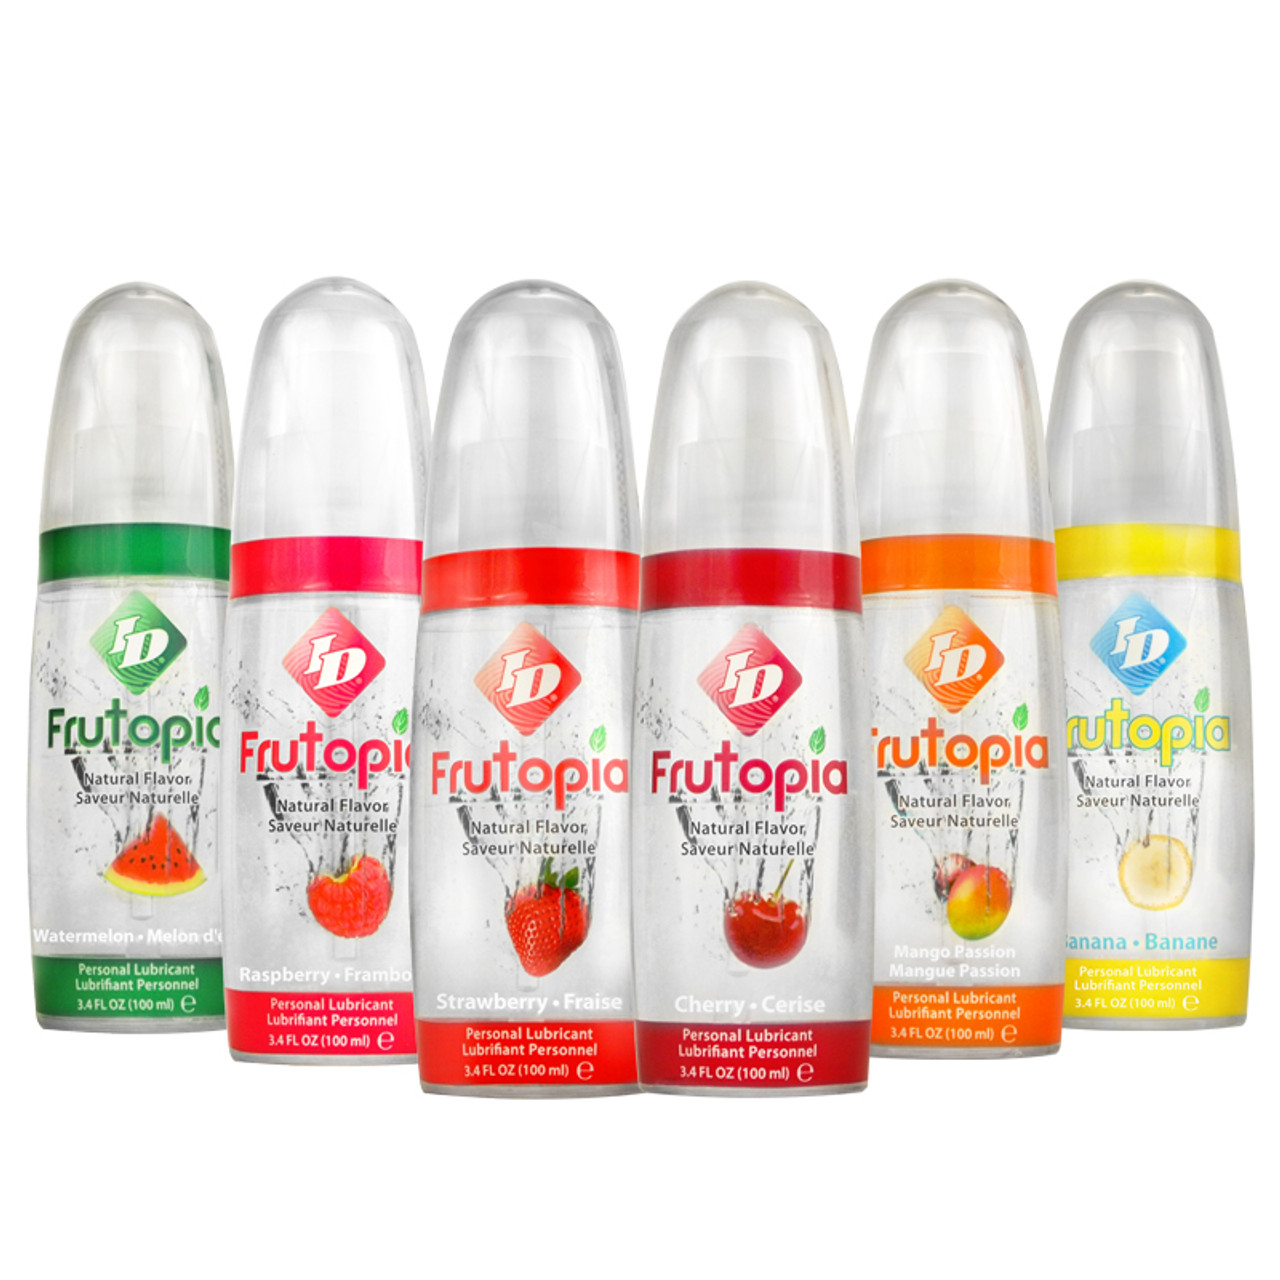 https://cdn11.bigcommerce.com/s-q7bj9b534k/images/stencil/1280x1280/products/3269/589/id-frutopia-assorted-flavors-lubricant-3.4oz-bottle-IDDTXE10__58703.1673032385.jpg?c=1?imbypass=on